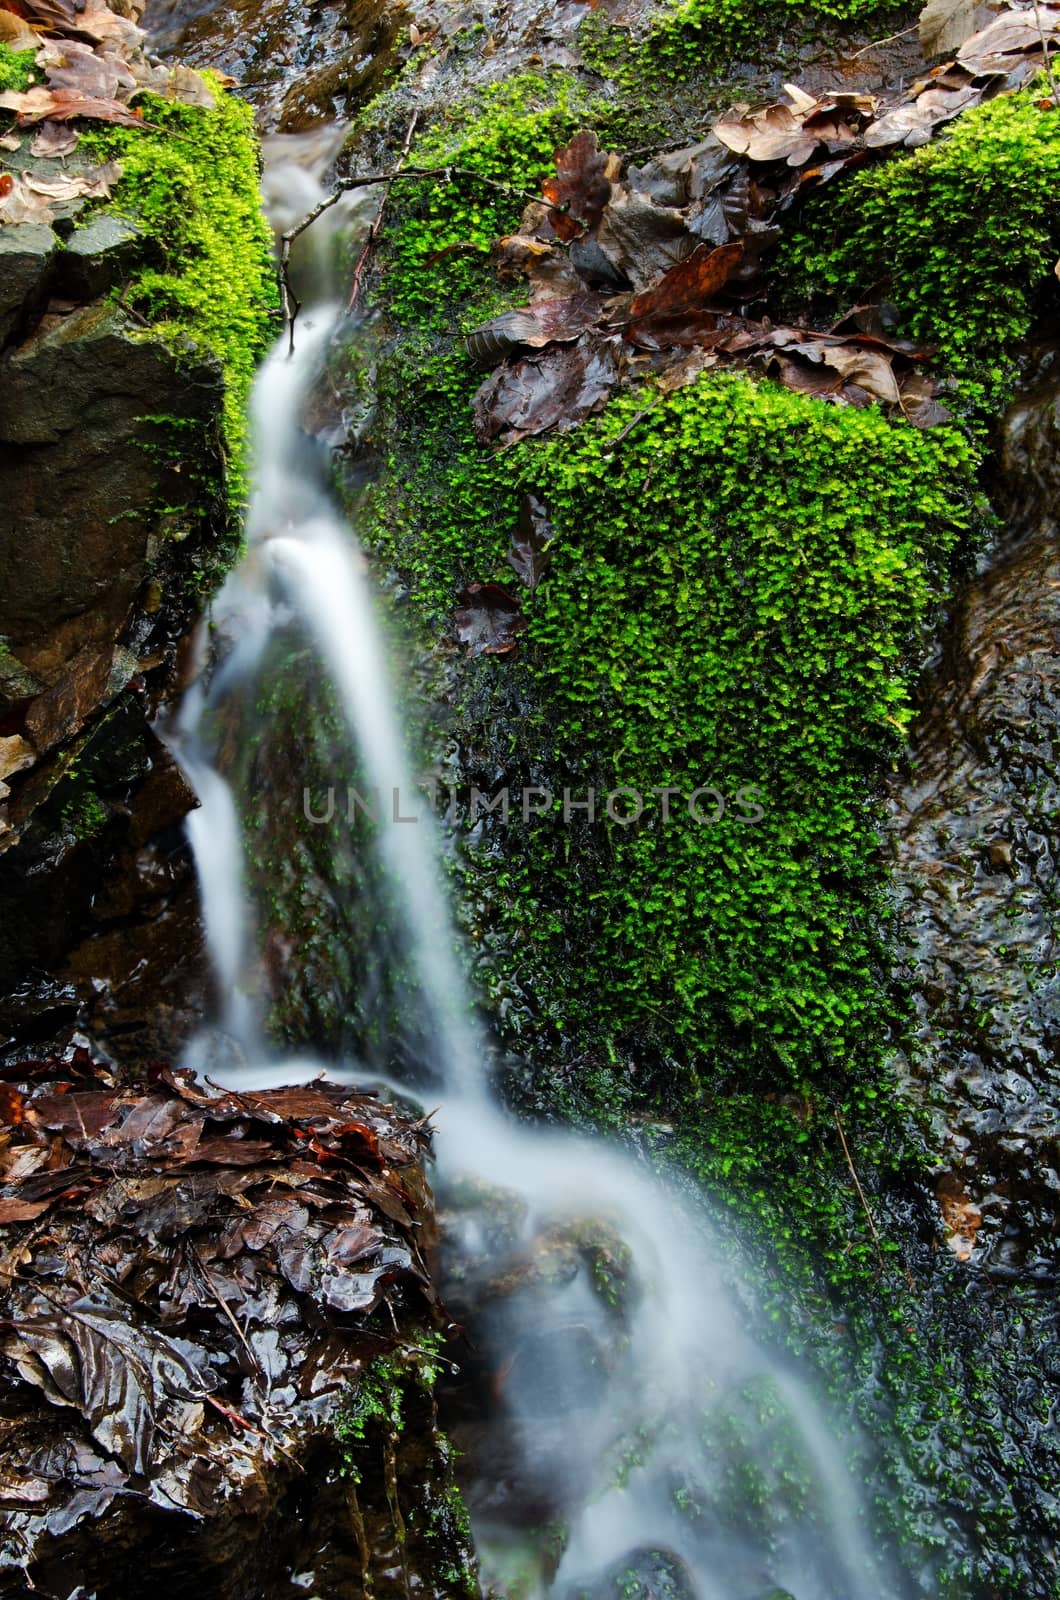 Detail of small waterfall on mossy rock.